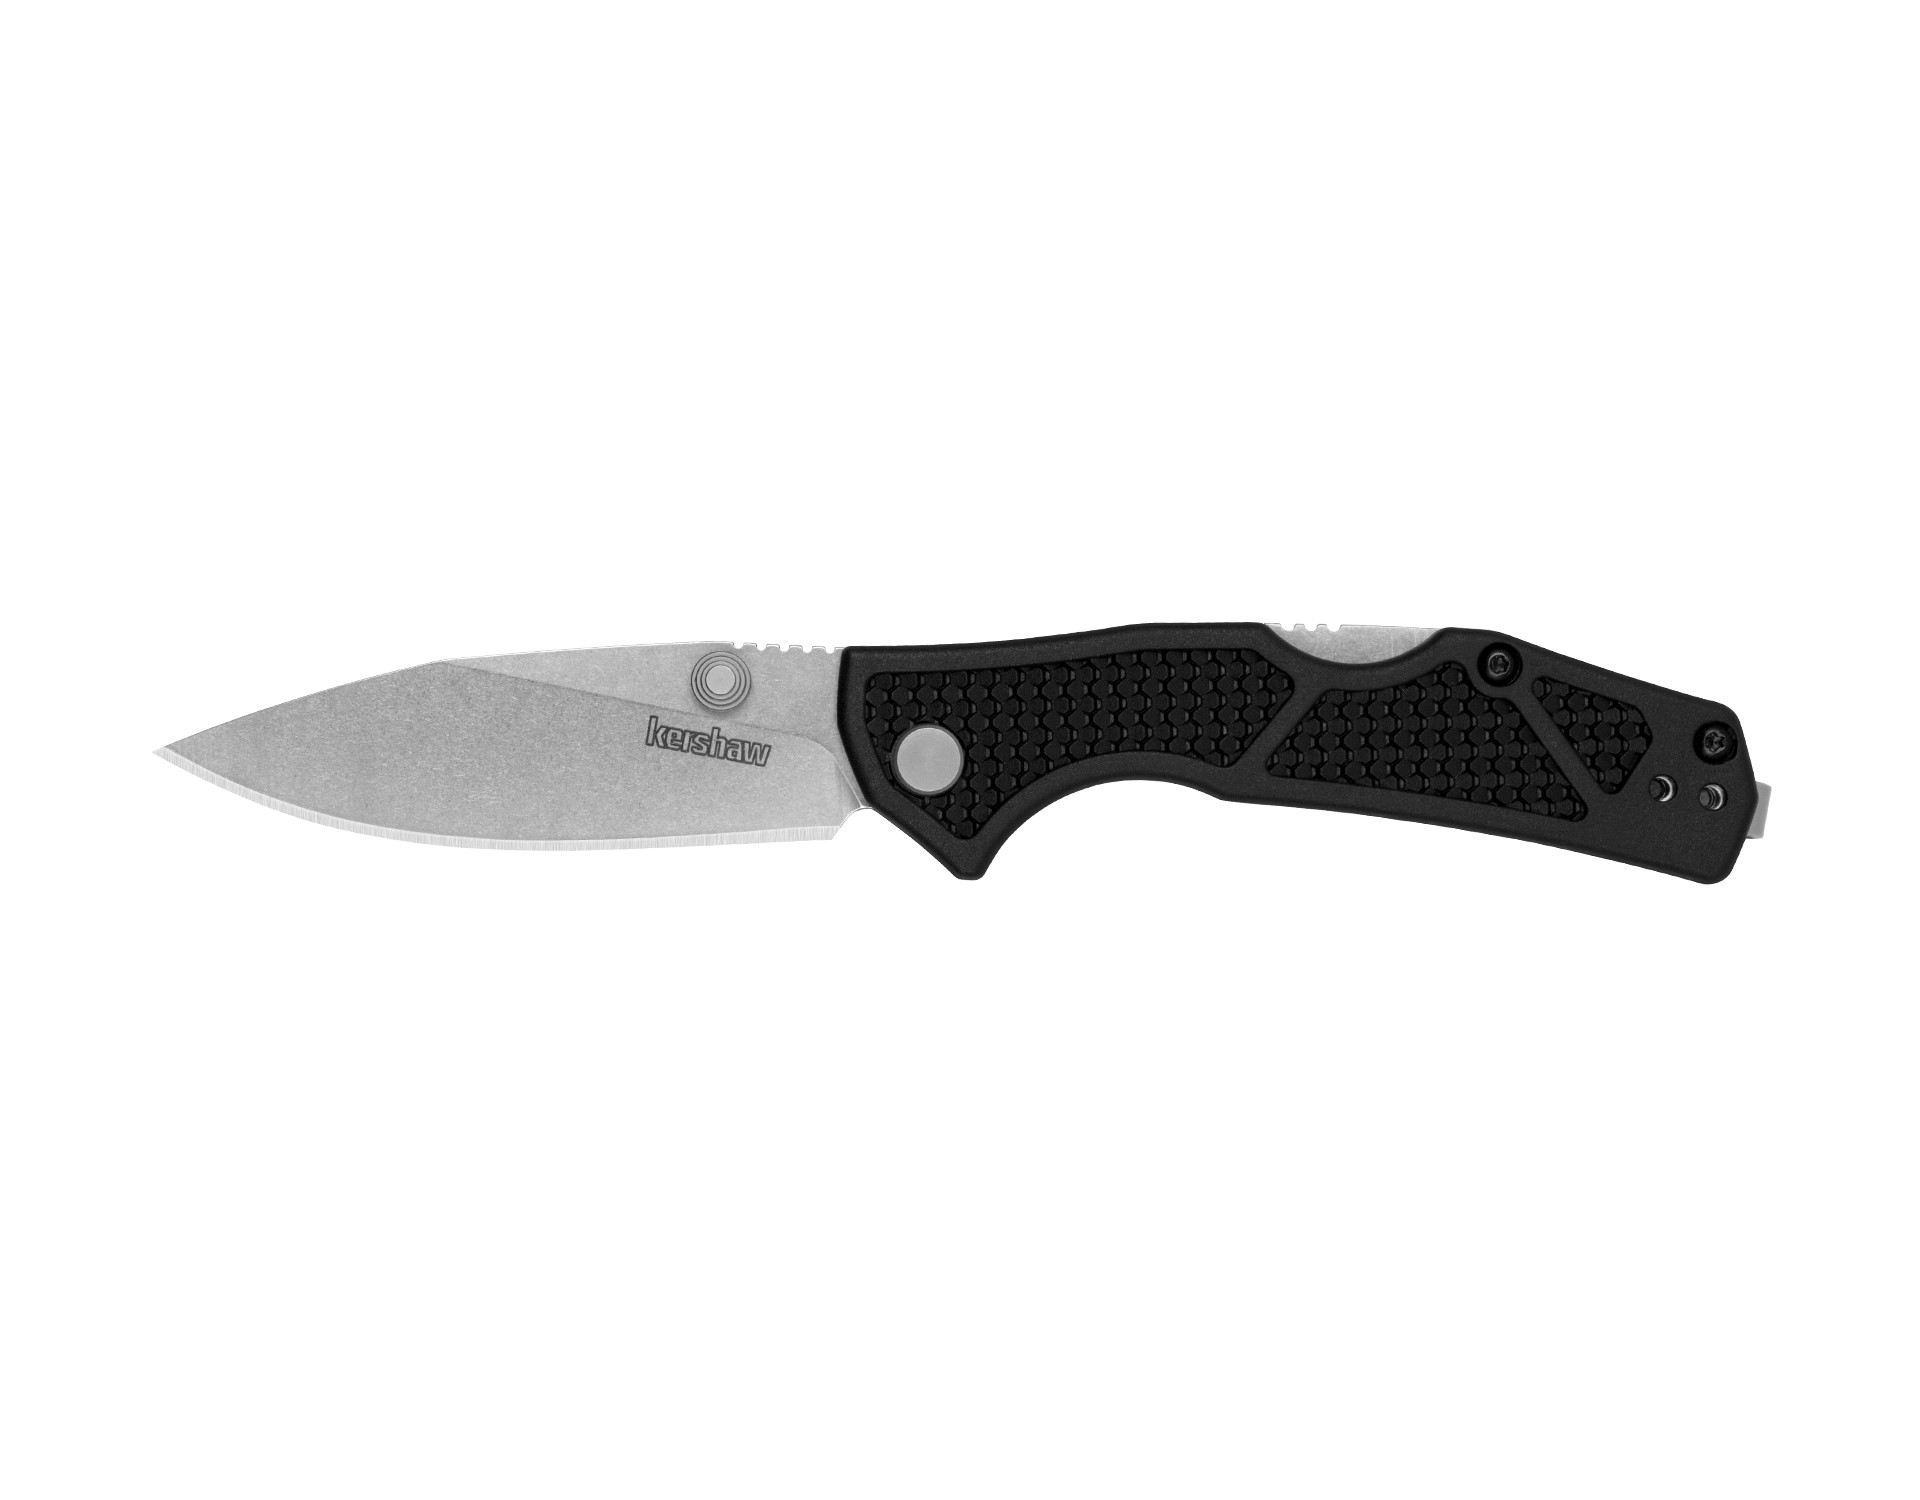 Kershaw Product Release No. 2 Brings New Fixed Blades and Folders